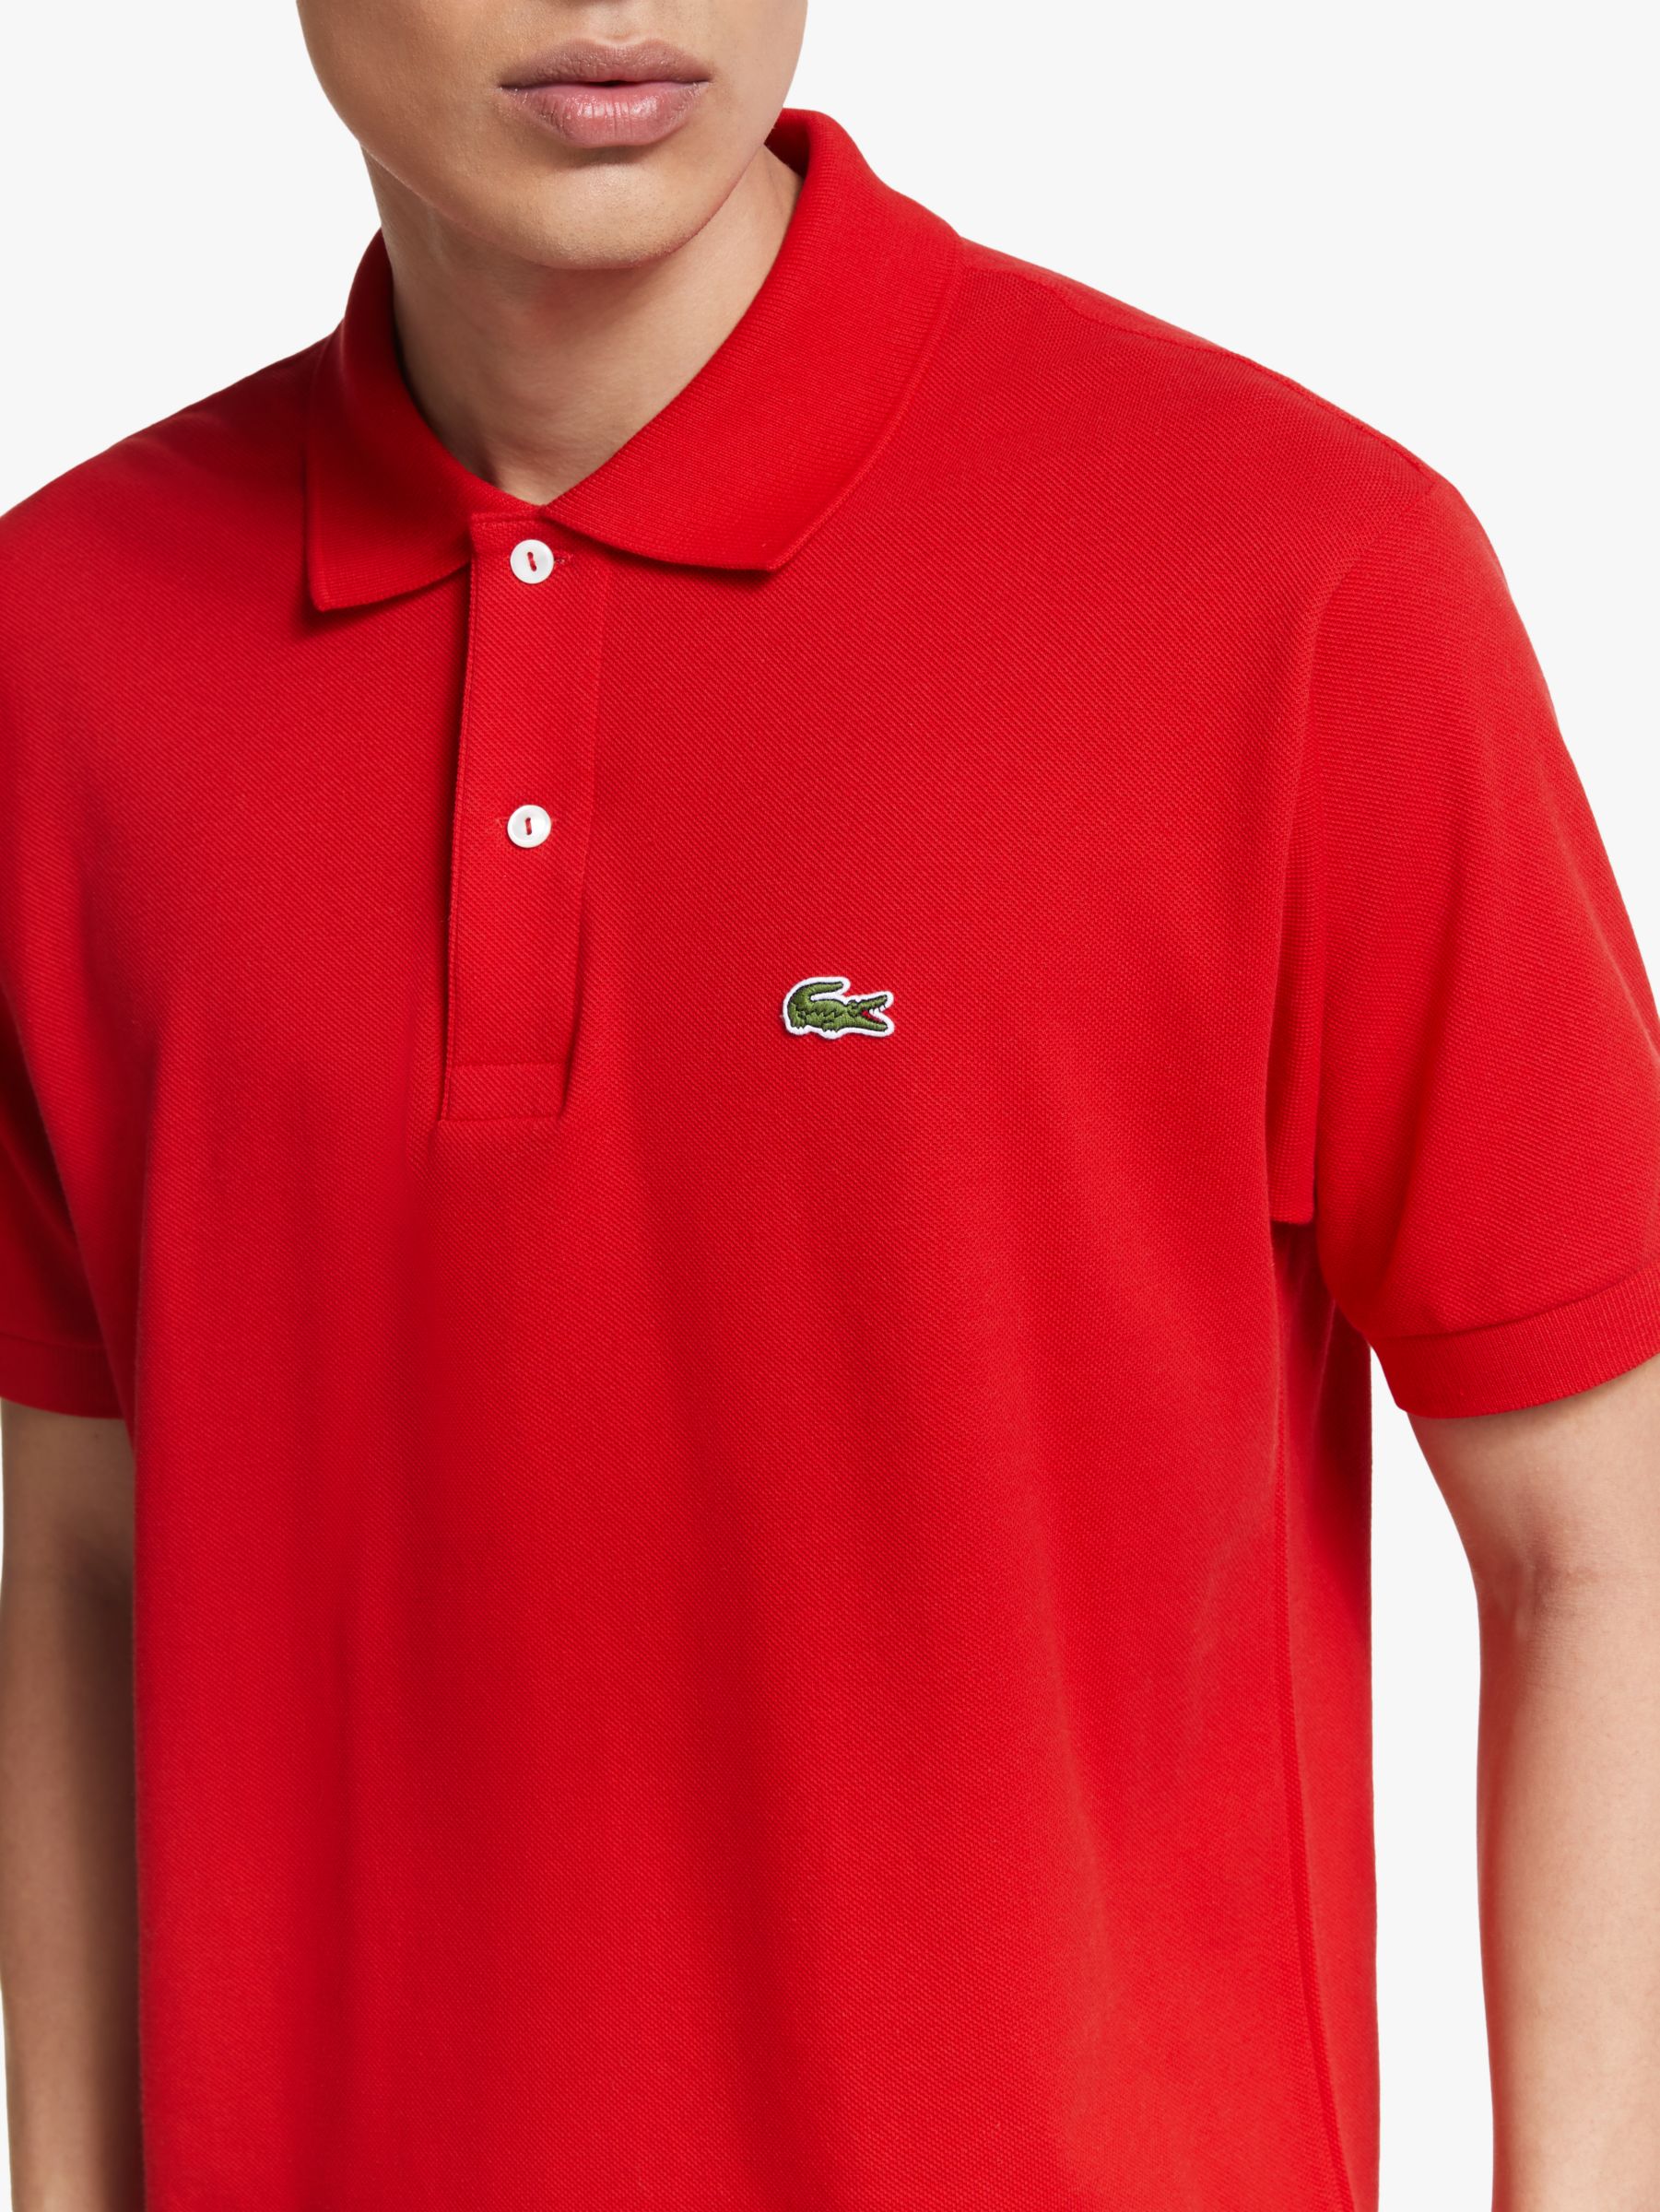 Lacoste L.12.12 Classic Regular Fit Short Sleeve Polo Shirt, Rogue at ...